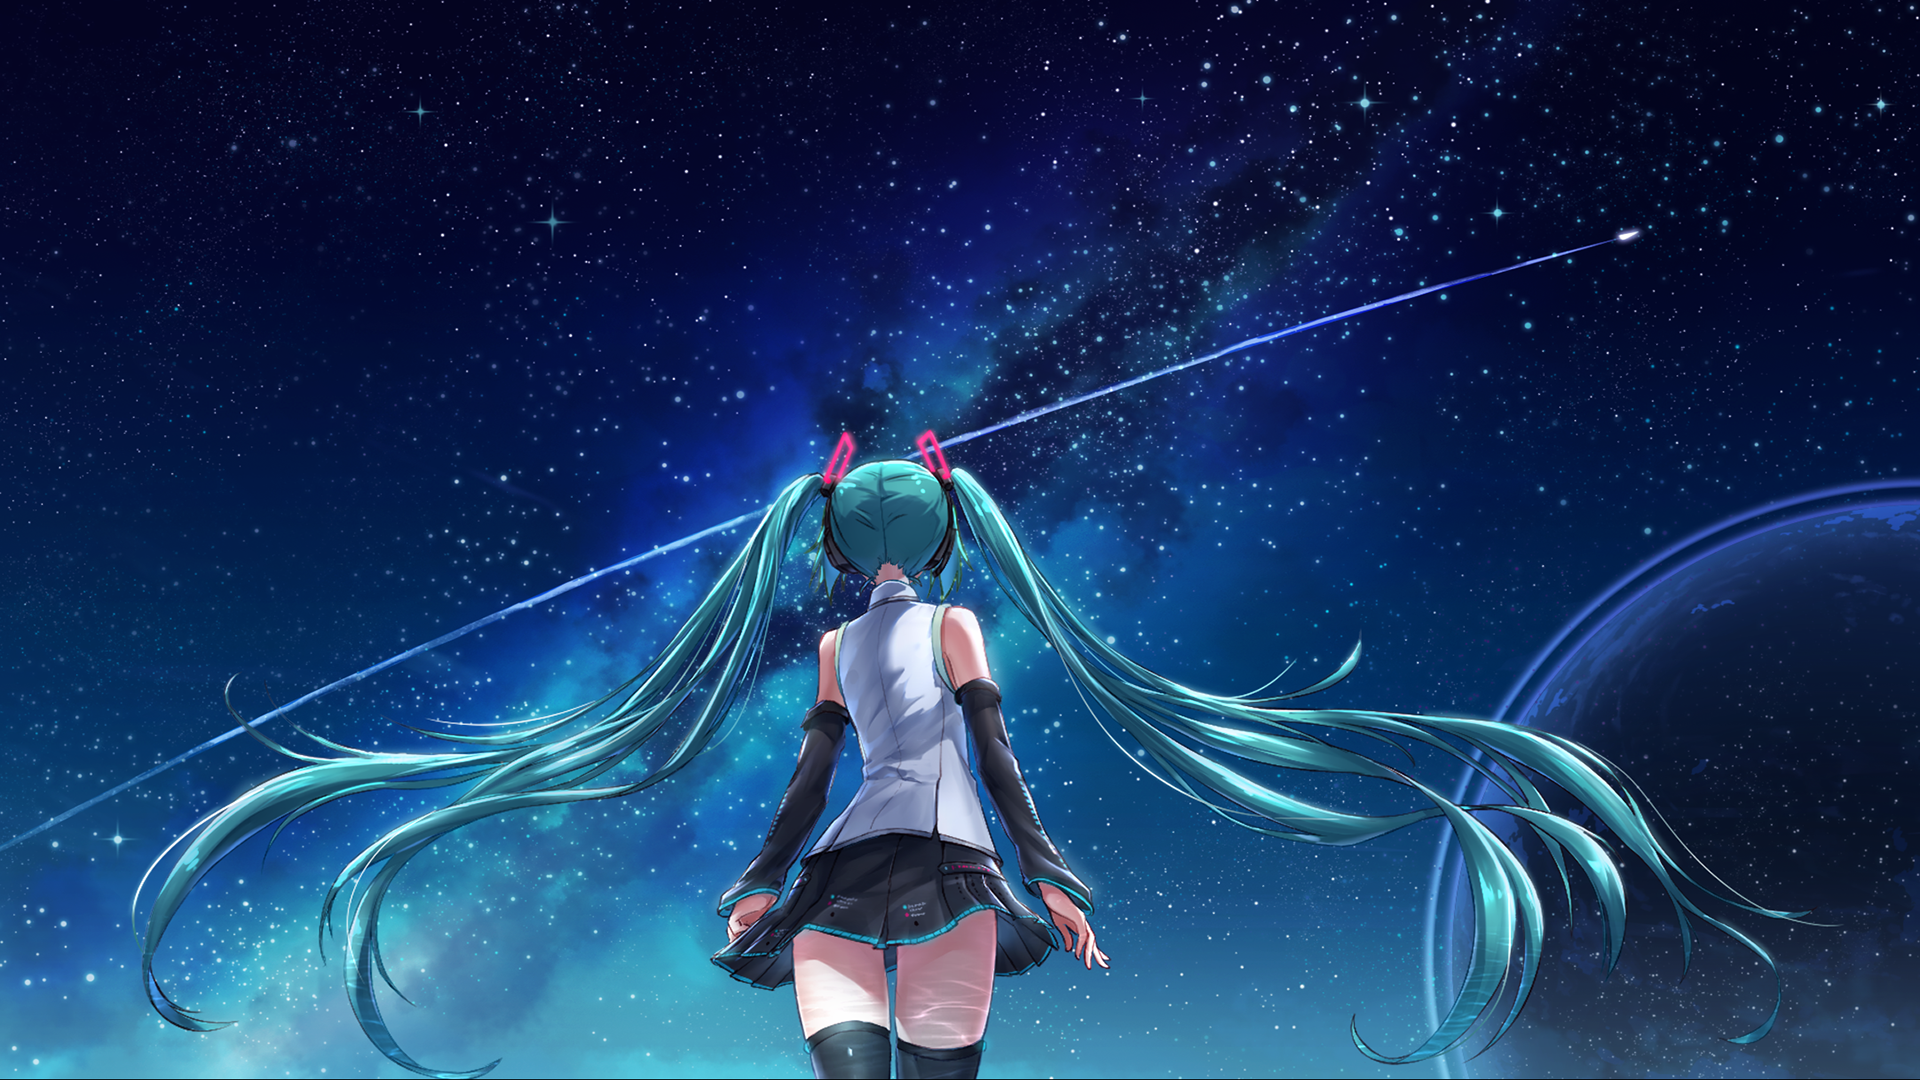 Hatsune Miku Live For Pc Wallpapers